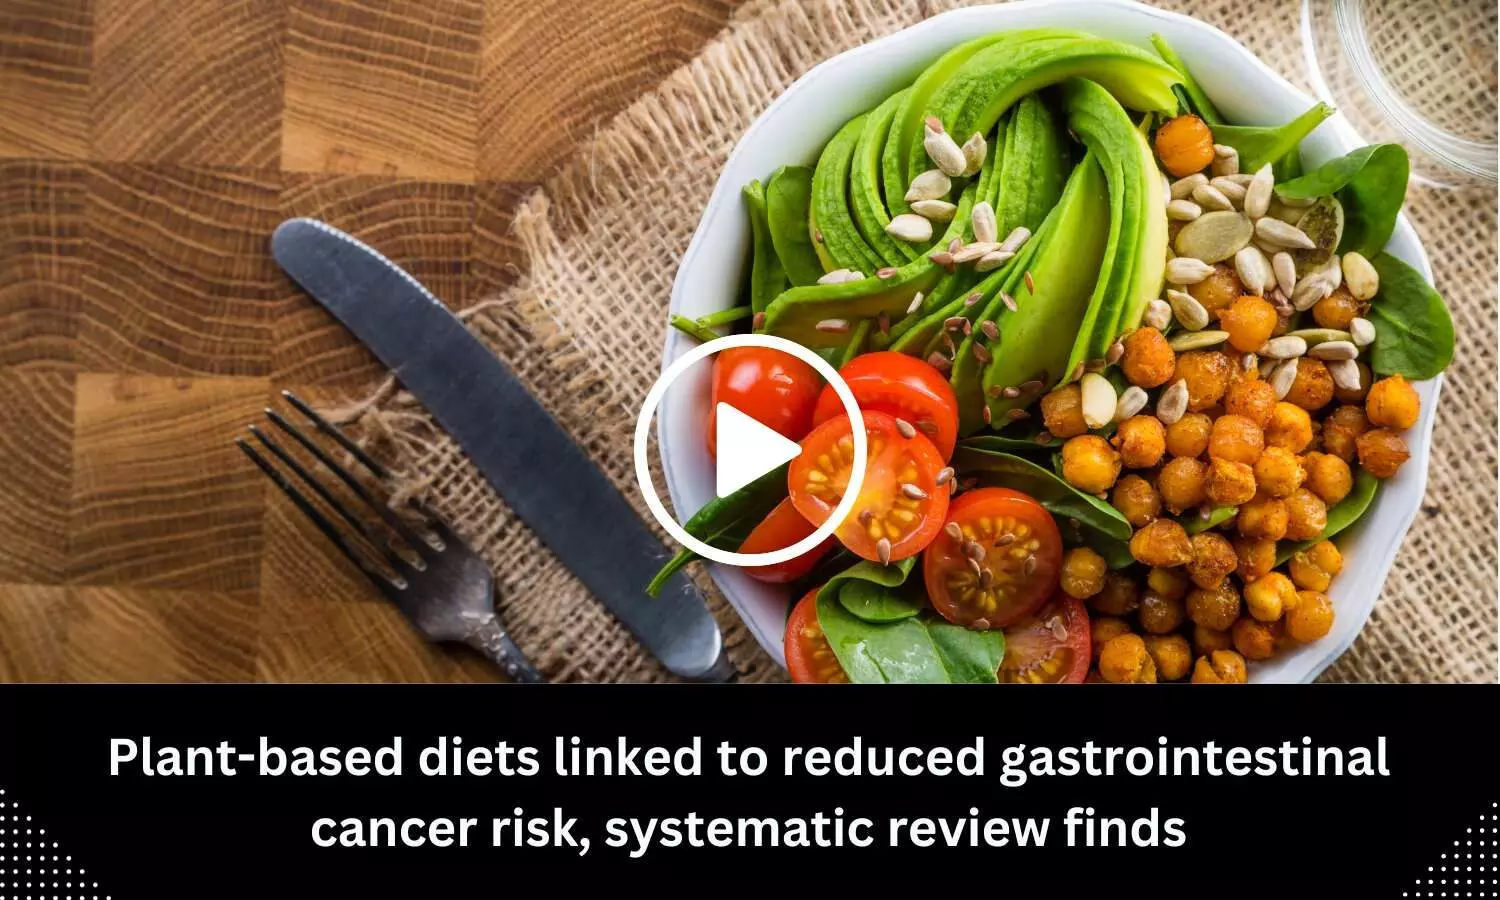 Plant-based diets linked to reduced gastrointestinal cancer risk, systematic review finds